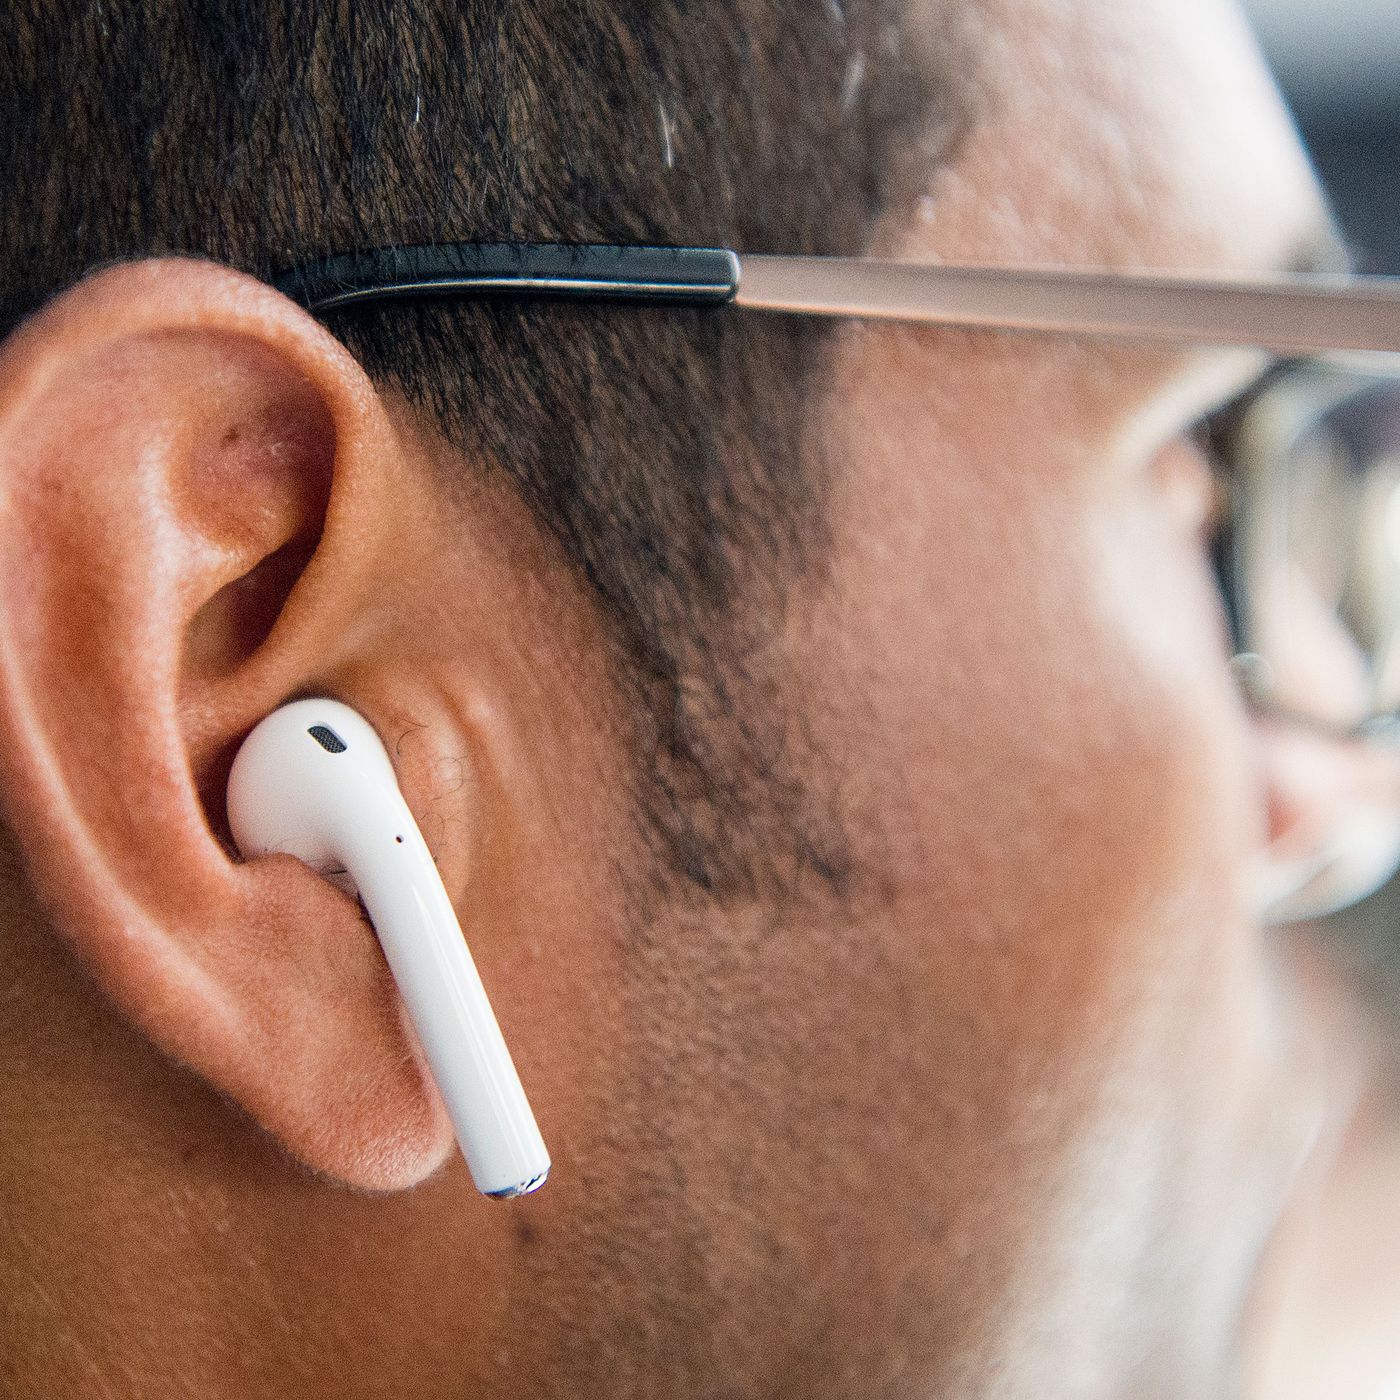 When to Wear AirPods?